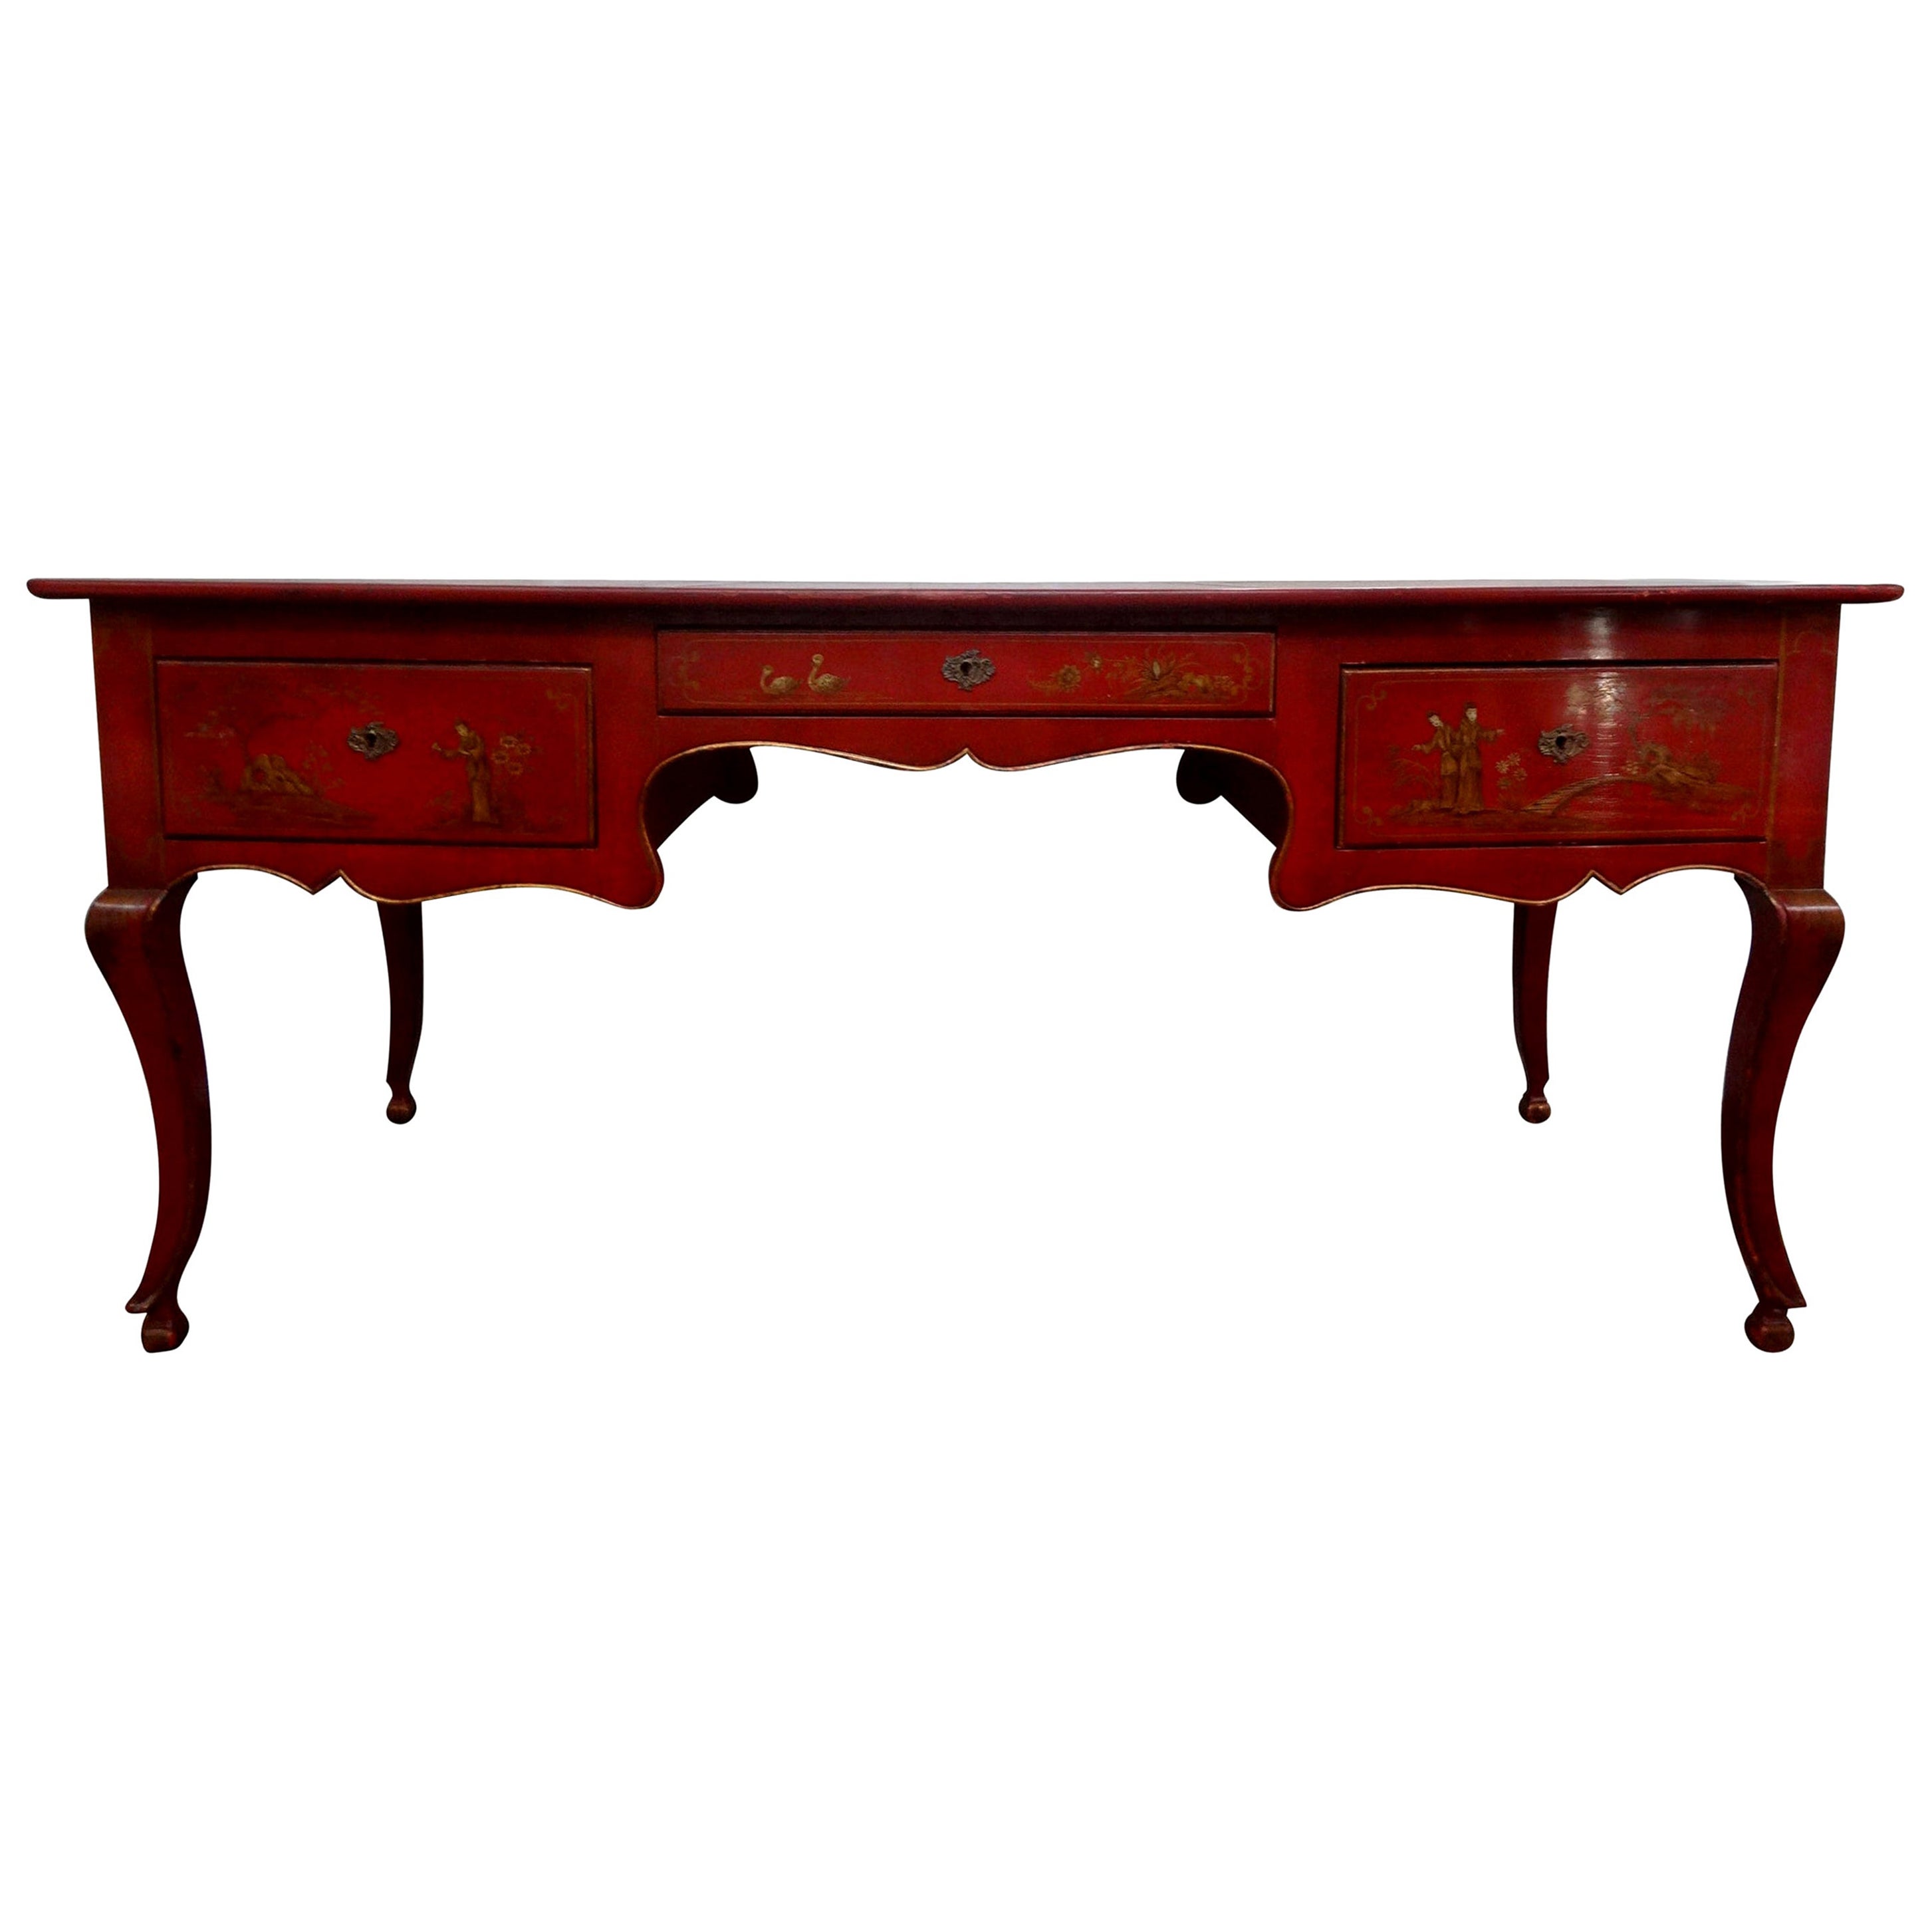  French Louis XV Style Chinoiserie Desk or Bureau Plat By Baker